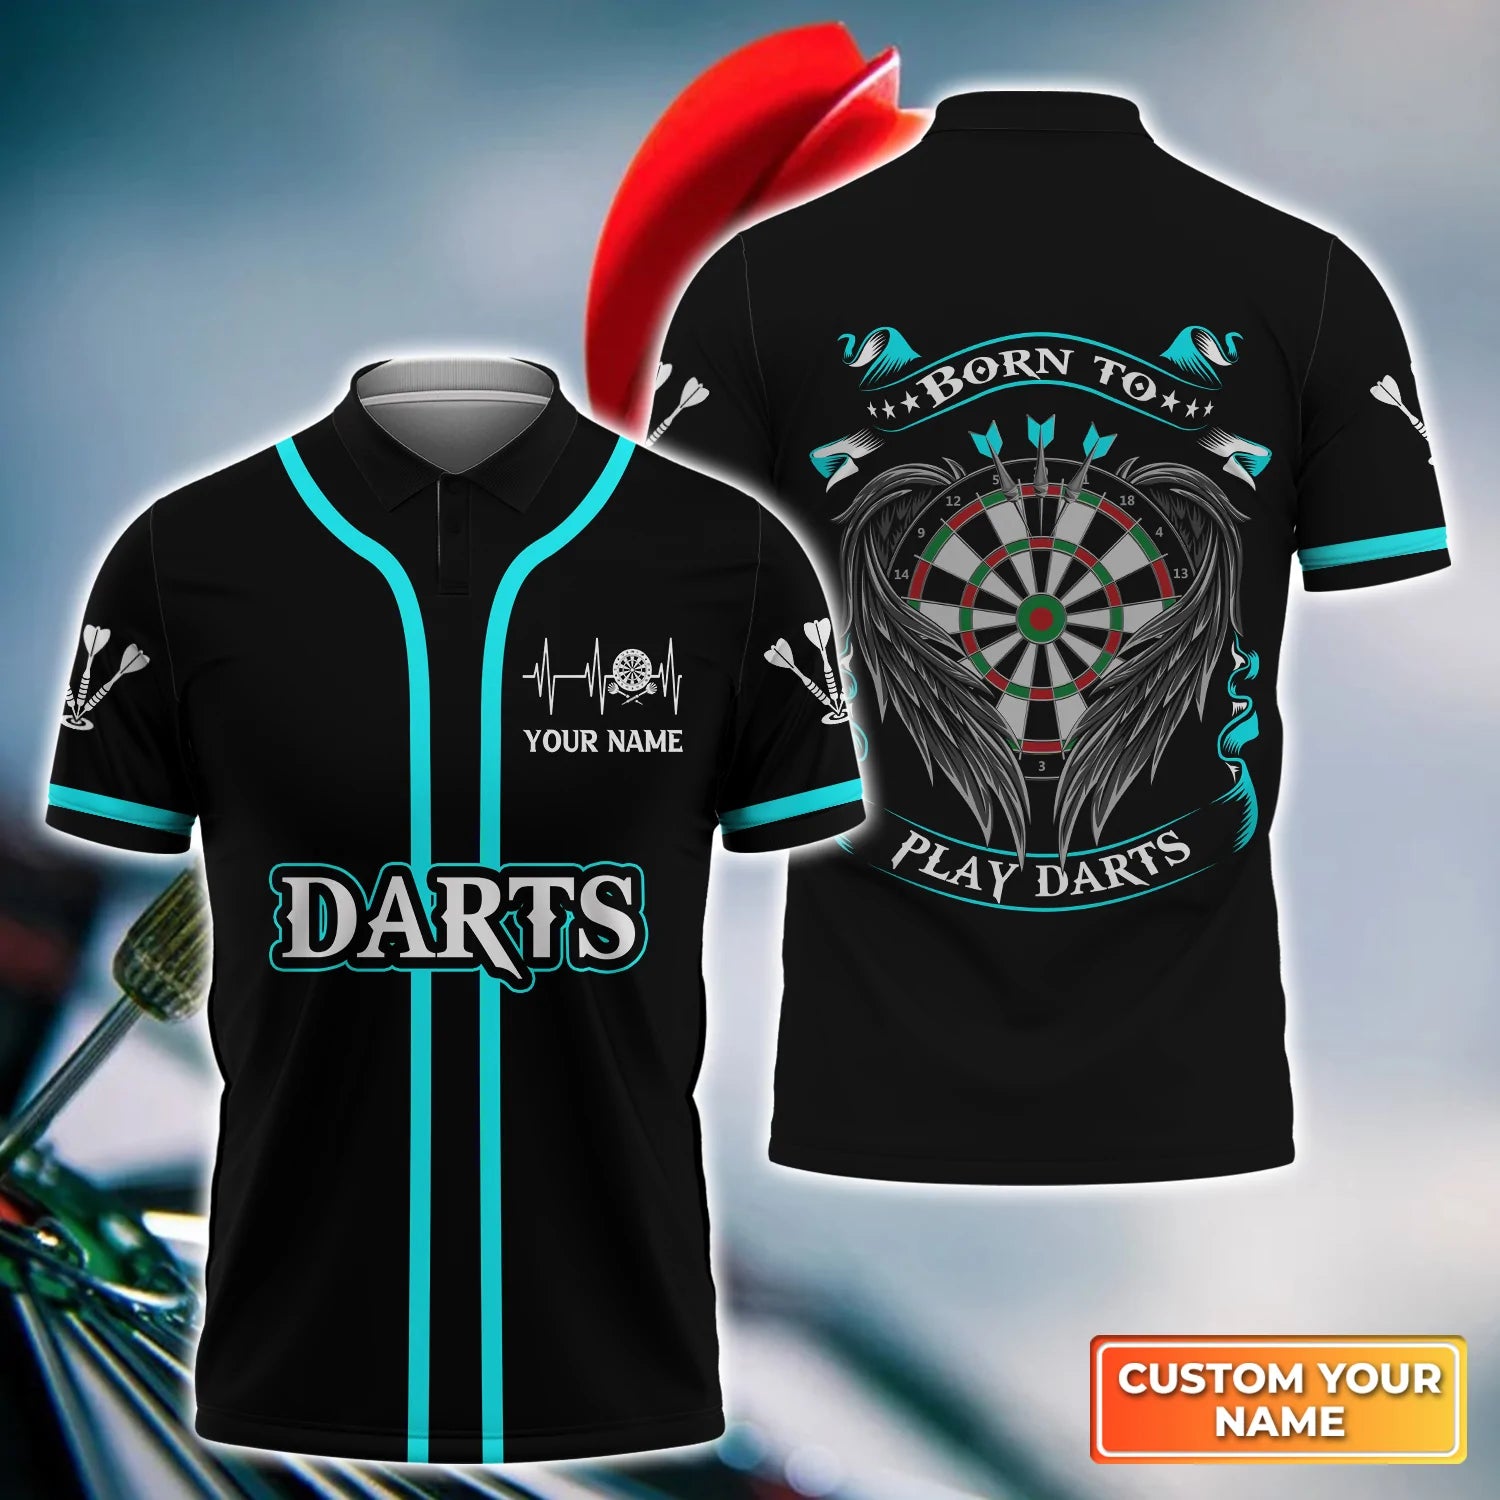 Personalized Name 3D Polo Shirt for Darts Enthusiasts, Men’s Polo Shirt for Dart Players, Team Shirts for Dart Competitions – DP107